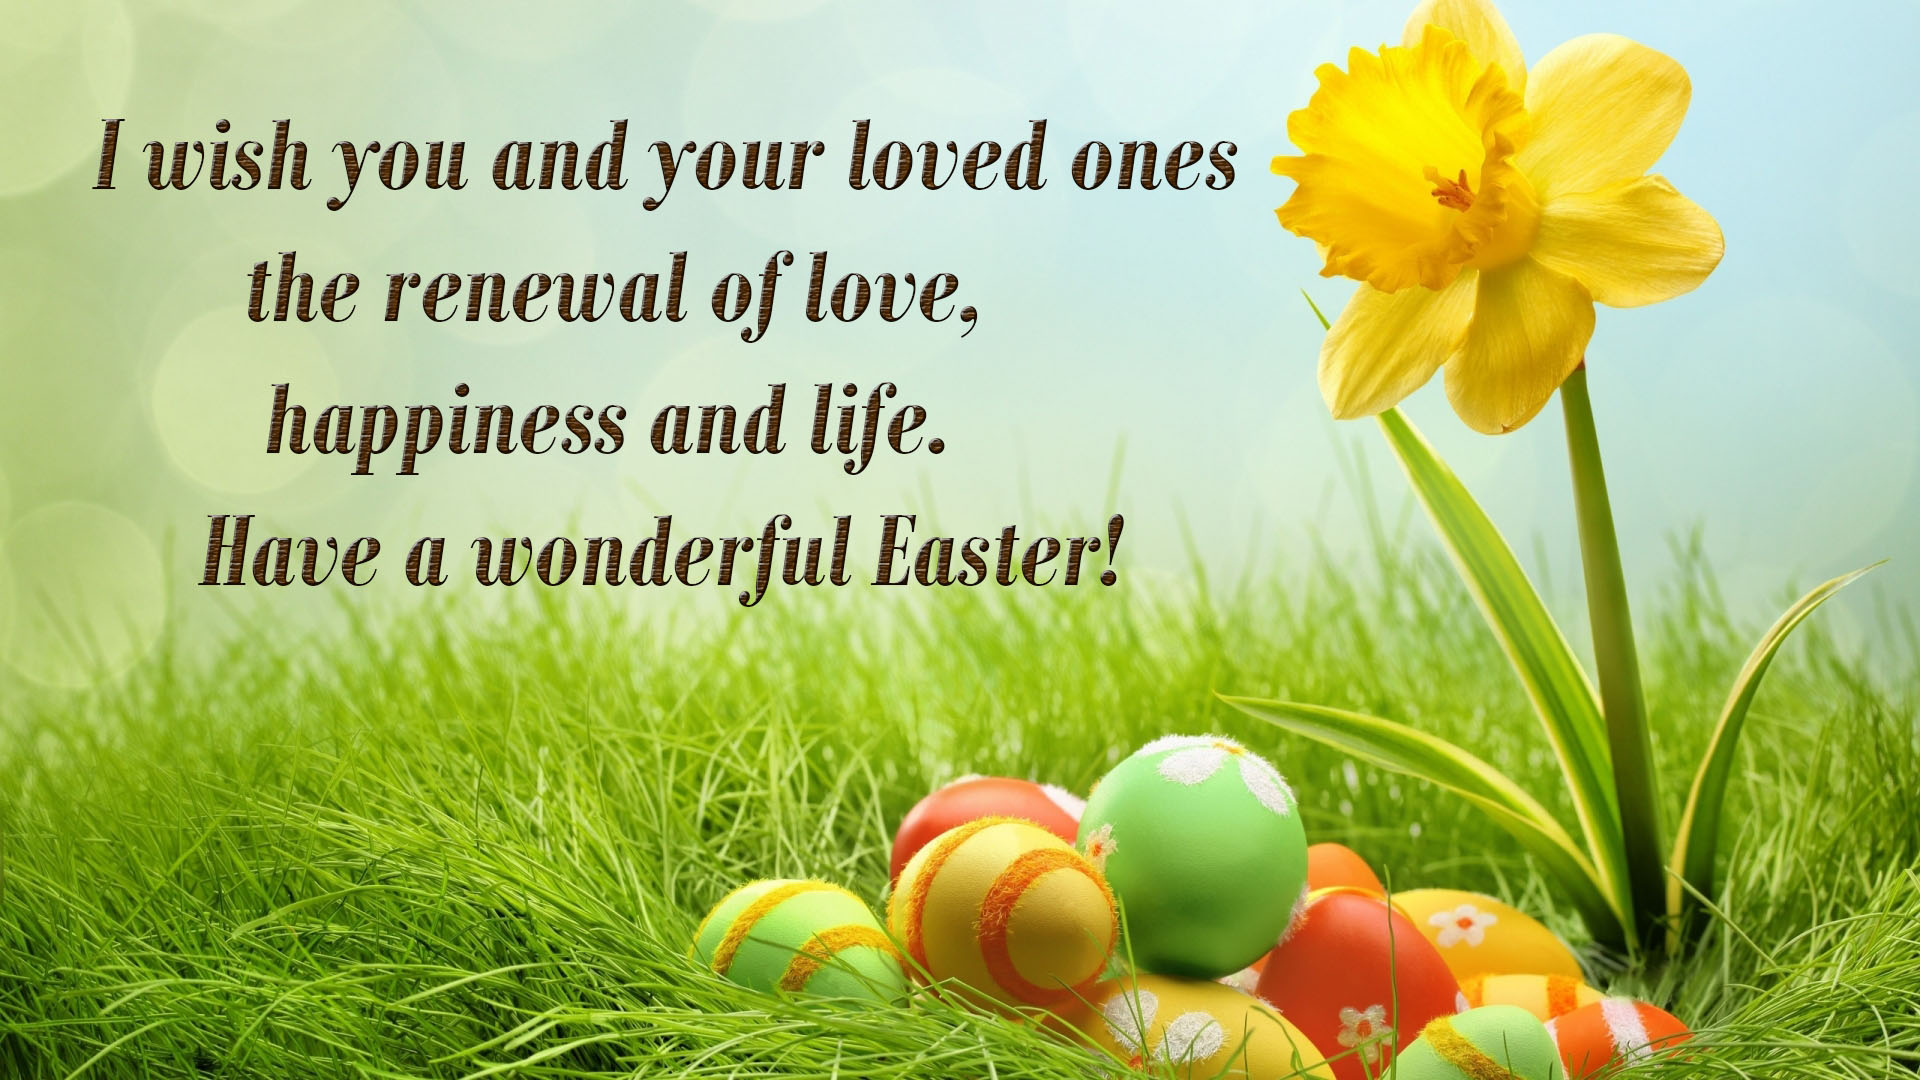 wishes for easter image 2018